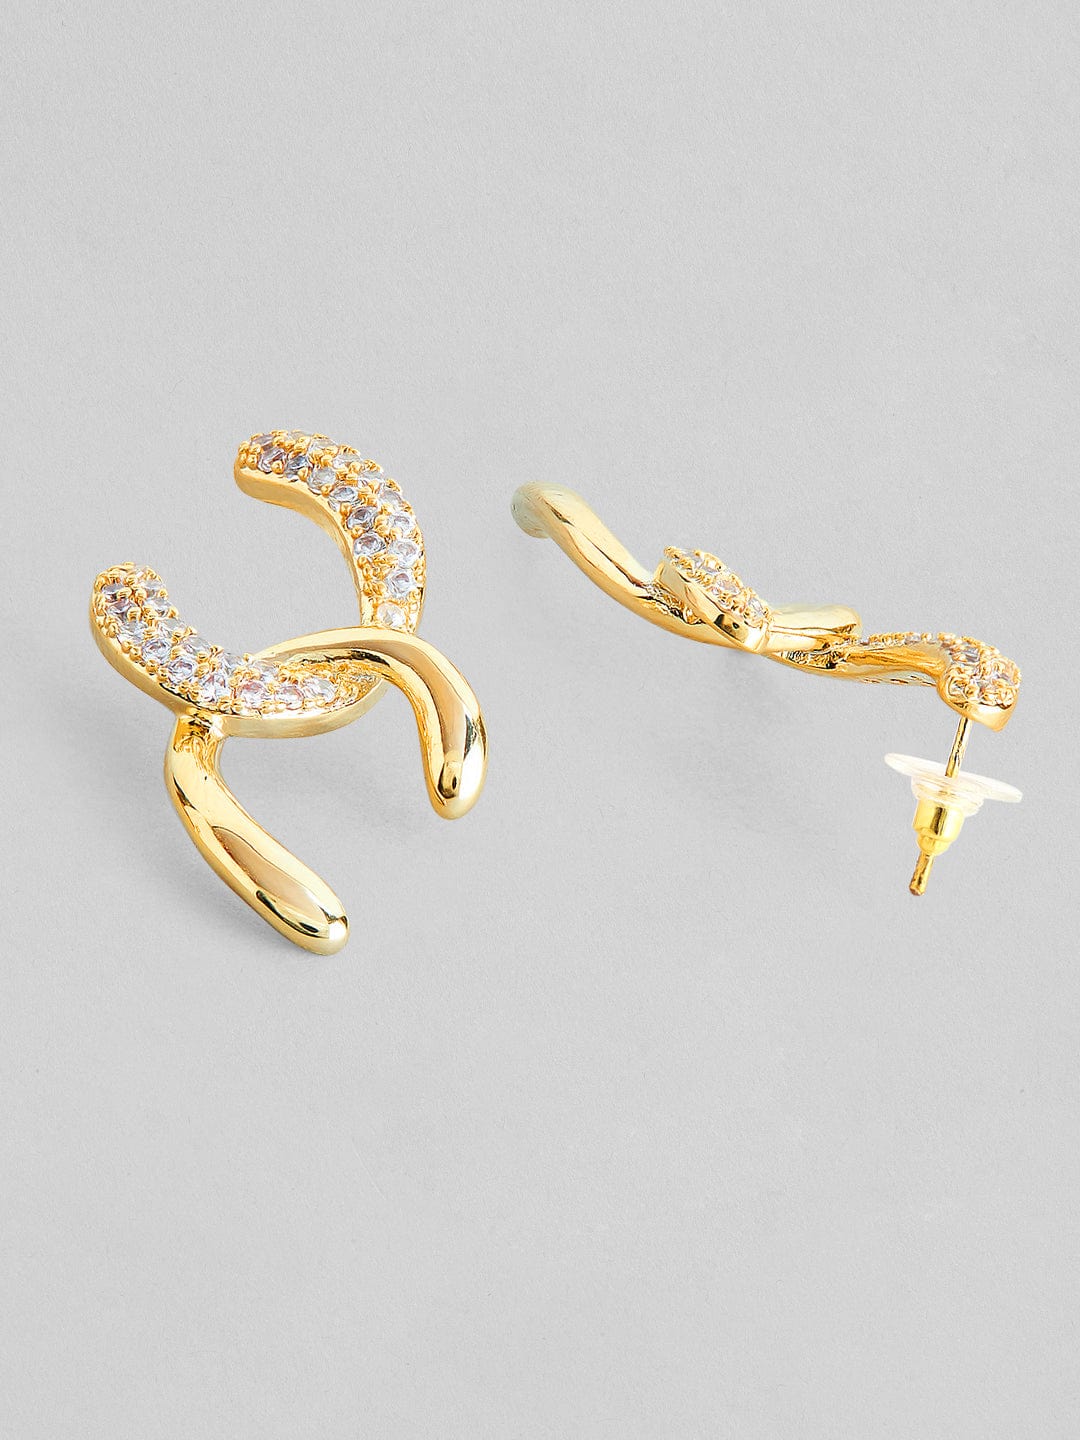 Rubans Voguish Gold-Toned Stone Studded Contemporary Studs Earrings Earrings